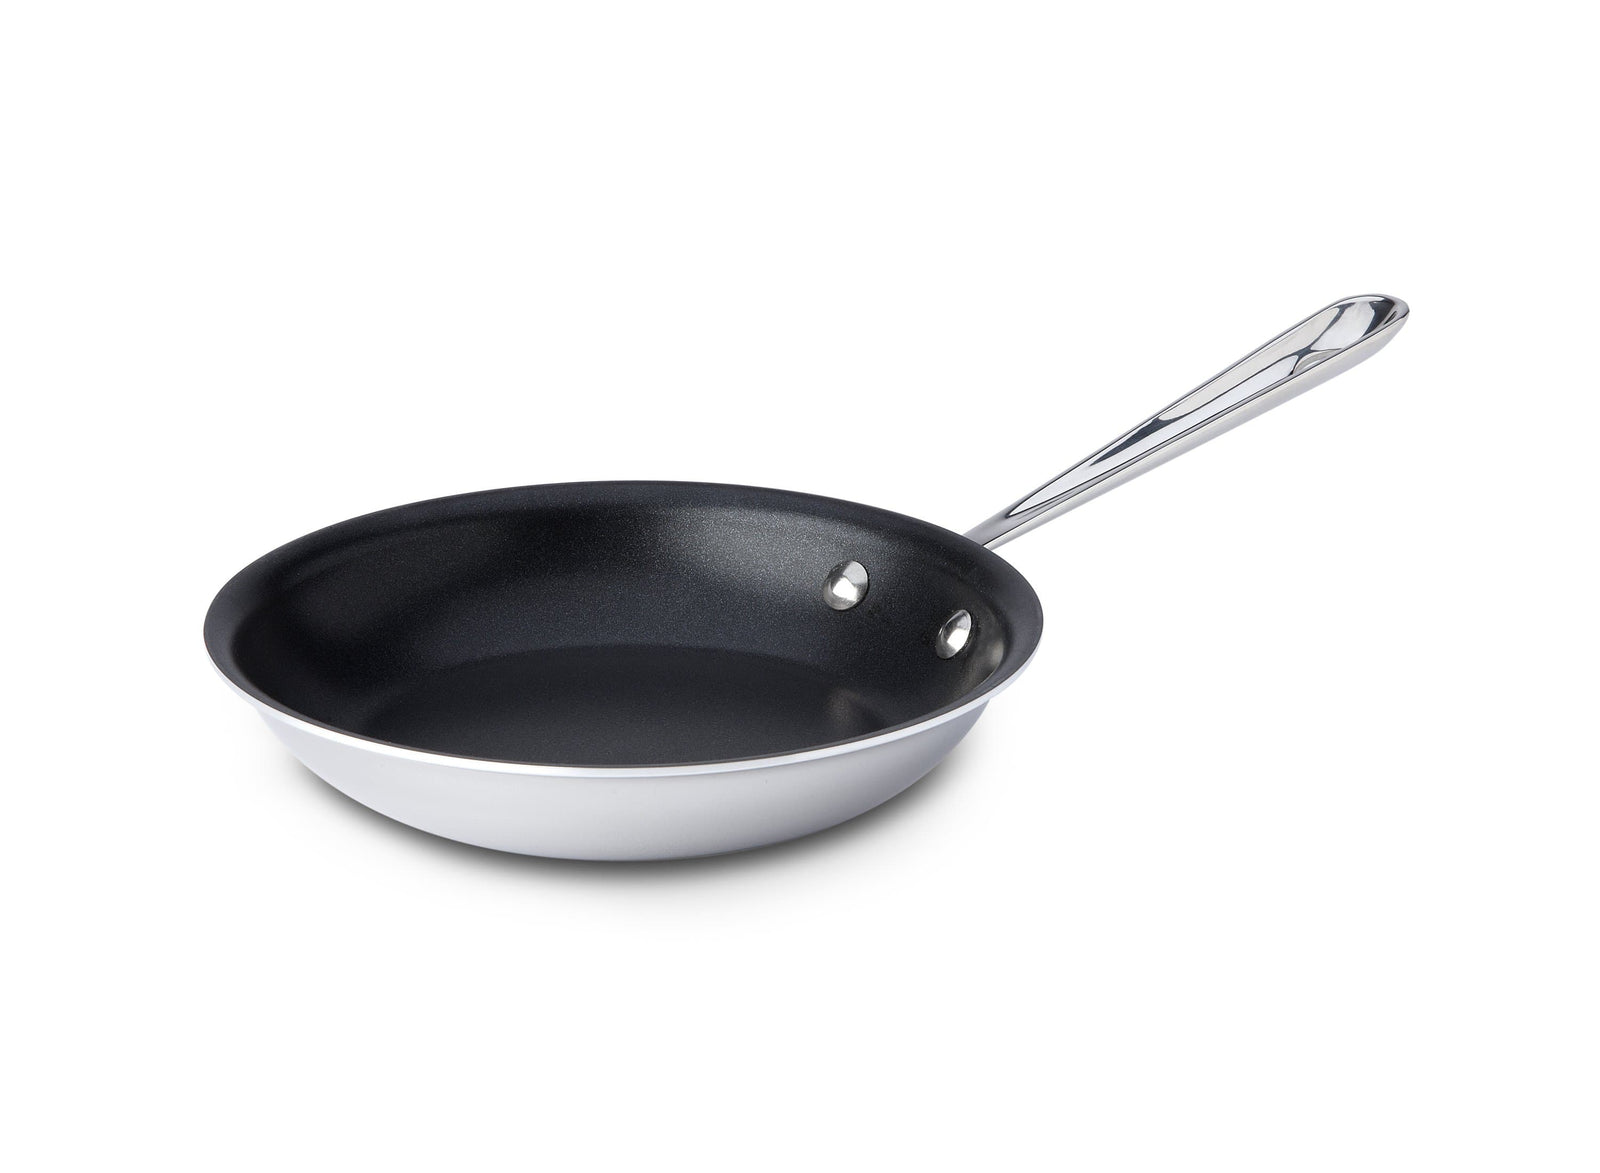 https://cdn.shopify.com/s/files/1/0474/2338/9856/products/all-clad-all-clad-nonstick-stainless-steel-12-fry-pan-011644502218-19591947190432_1600x.jpg?v=1604123974